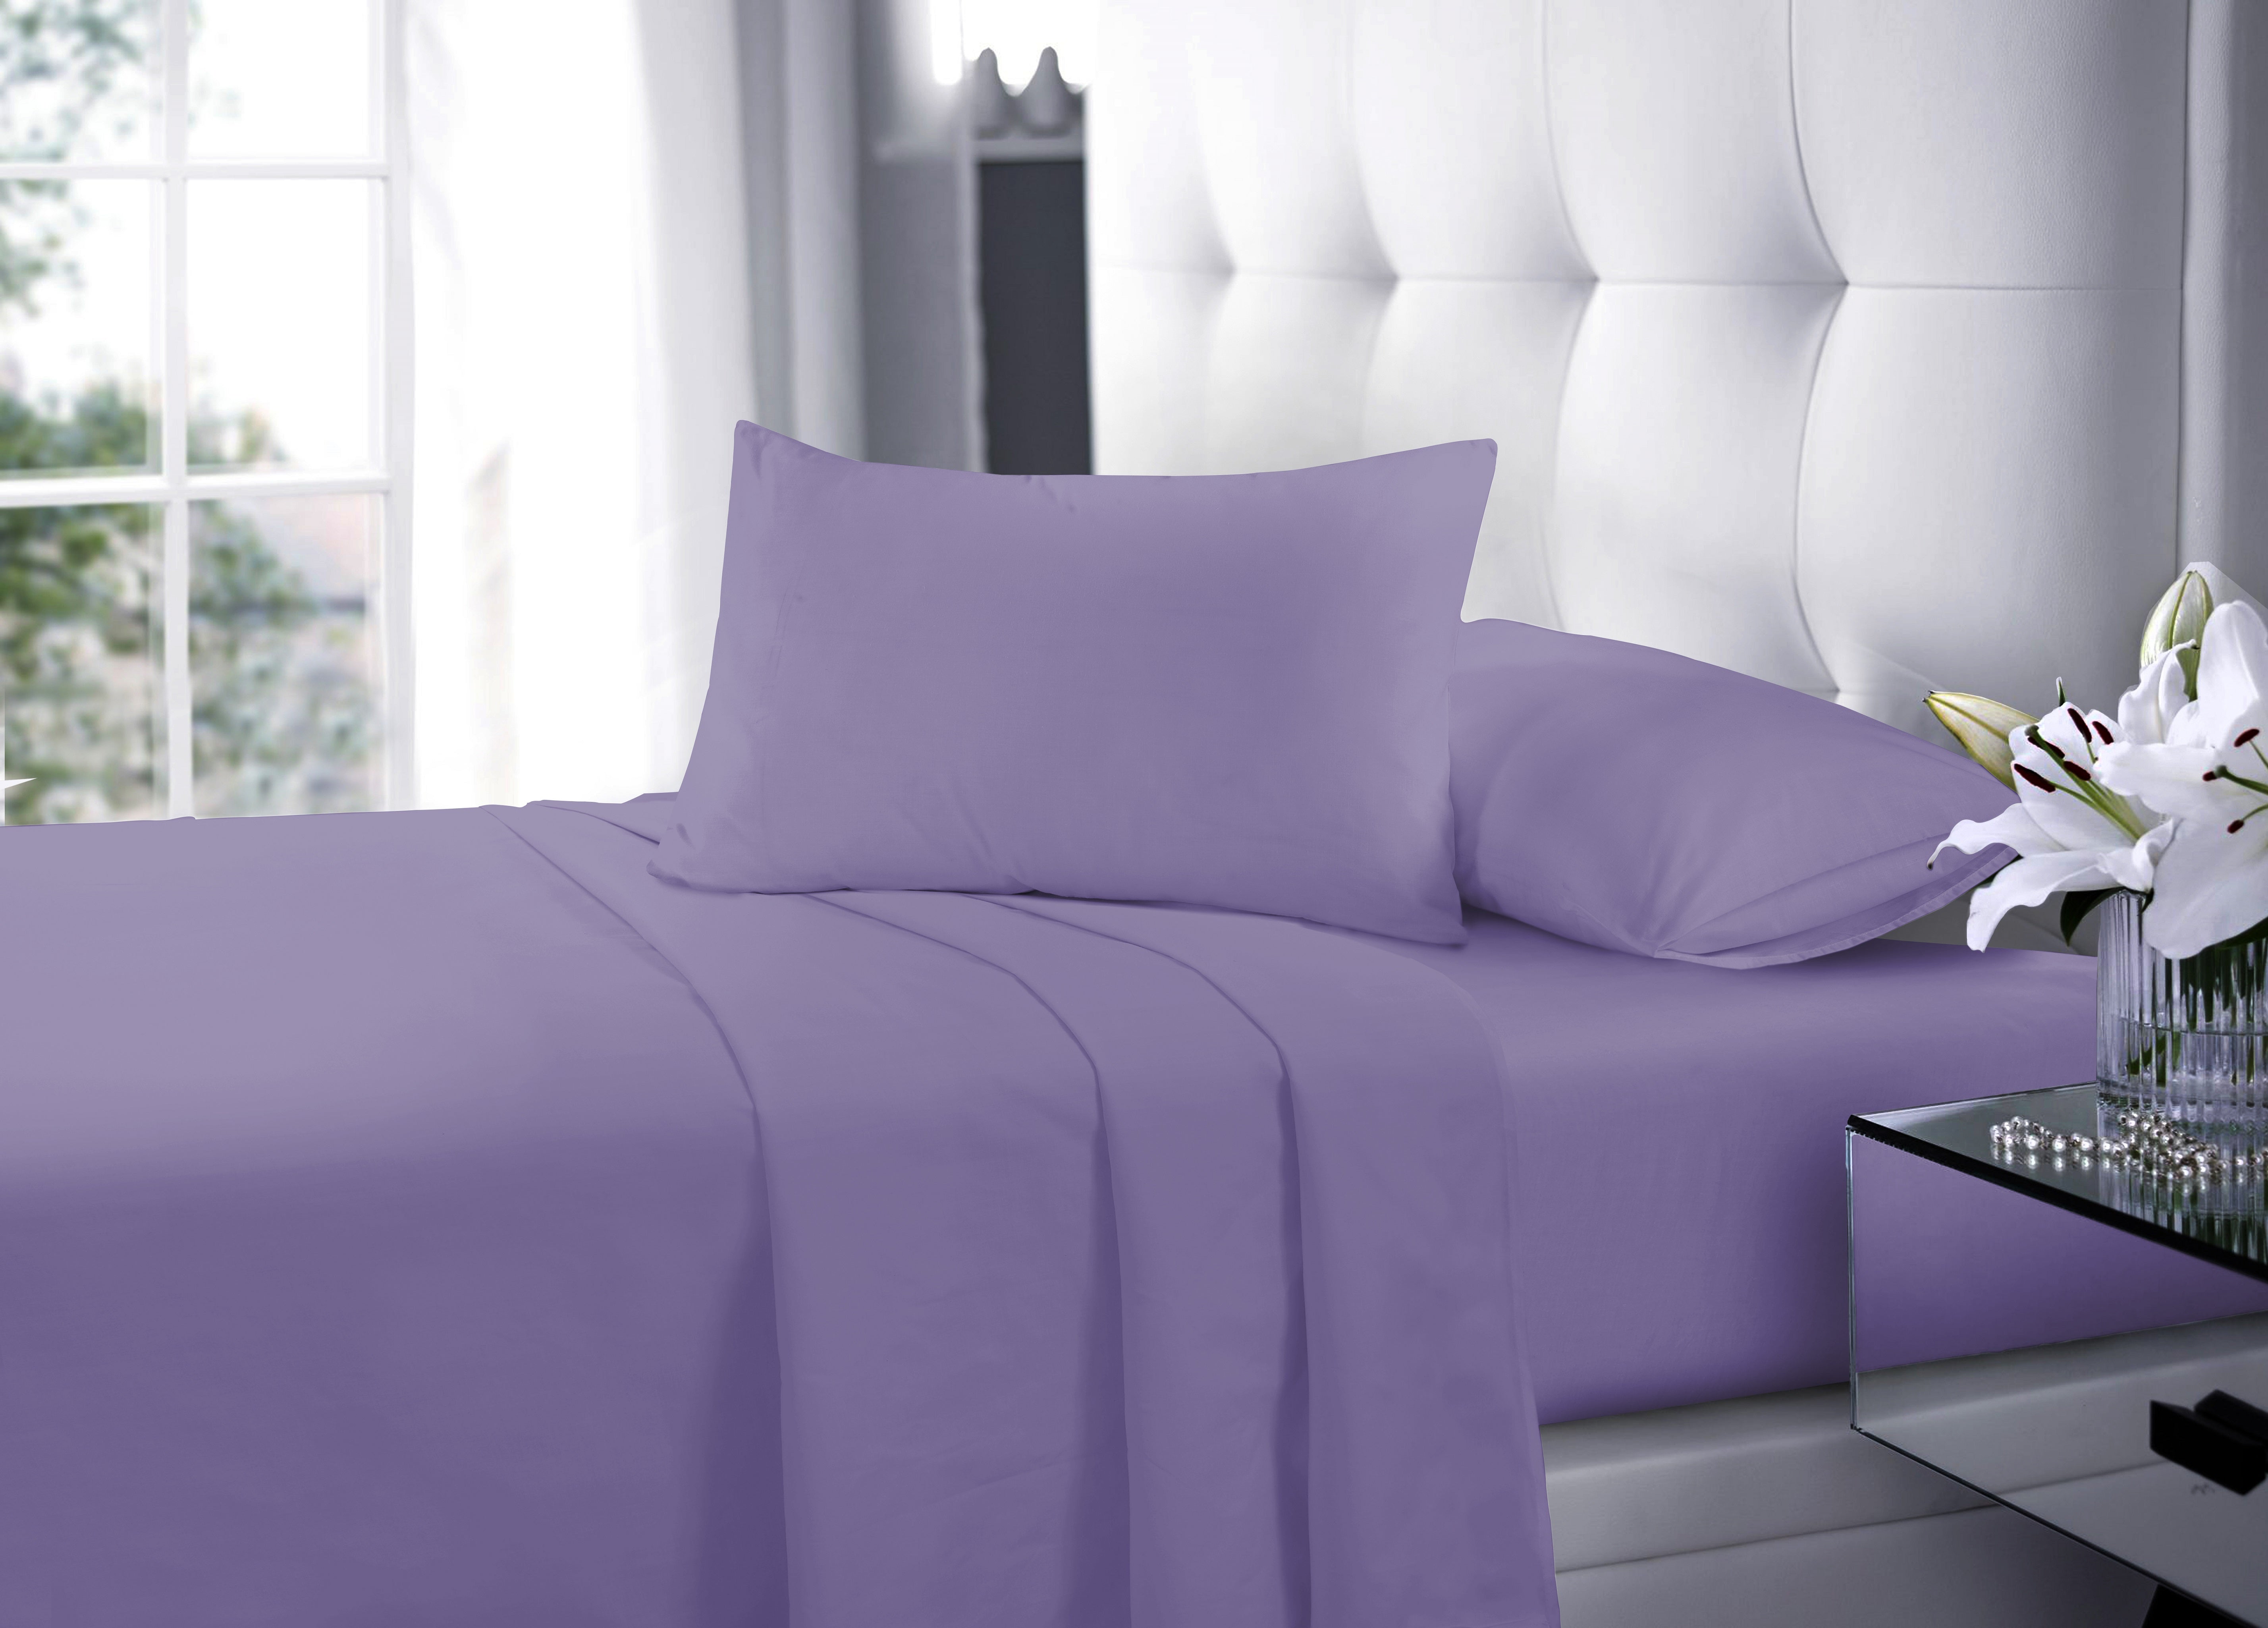 Discover the perfect blend of comfort and durability with our range of bedsheets. Our cotton bedsheets offer a soft, breathable feel for a cozy night's sleep, while our polycotton bedsheets combine the best of polyester's durability with the comfort of cotton. Whether you prefer the natural luxury of cotton or the easy-care convenience of polycotton, our selection ensures that you find the ideal fit for your bed. Elevate your sleep experience with bedsheets that cater to your every need.